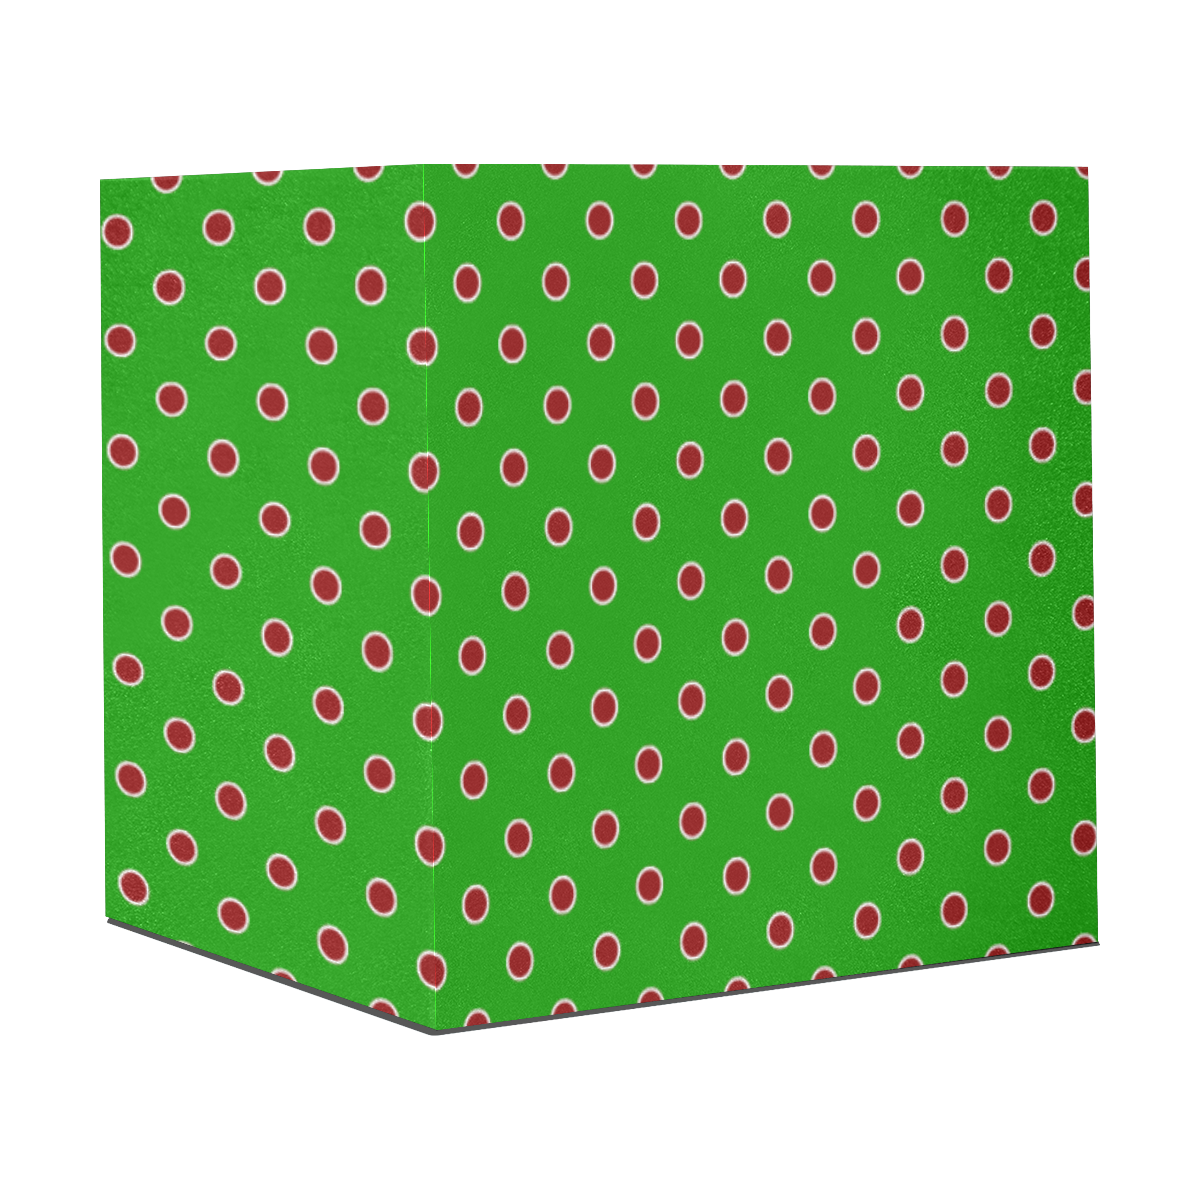 Red Polka Dots on Green Gift Wrapping Paper 58"x 23" (3 Rolls)